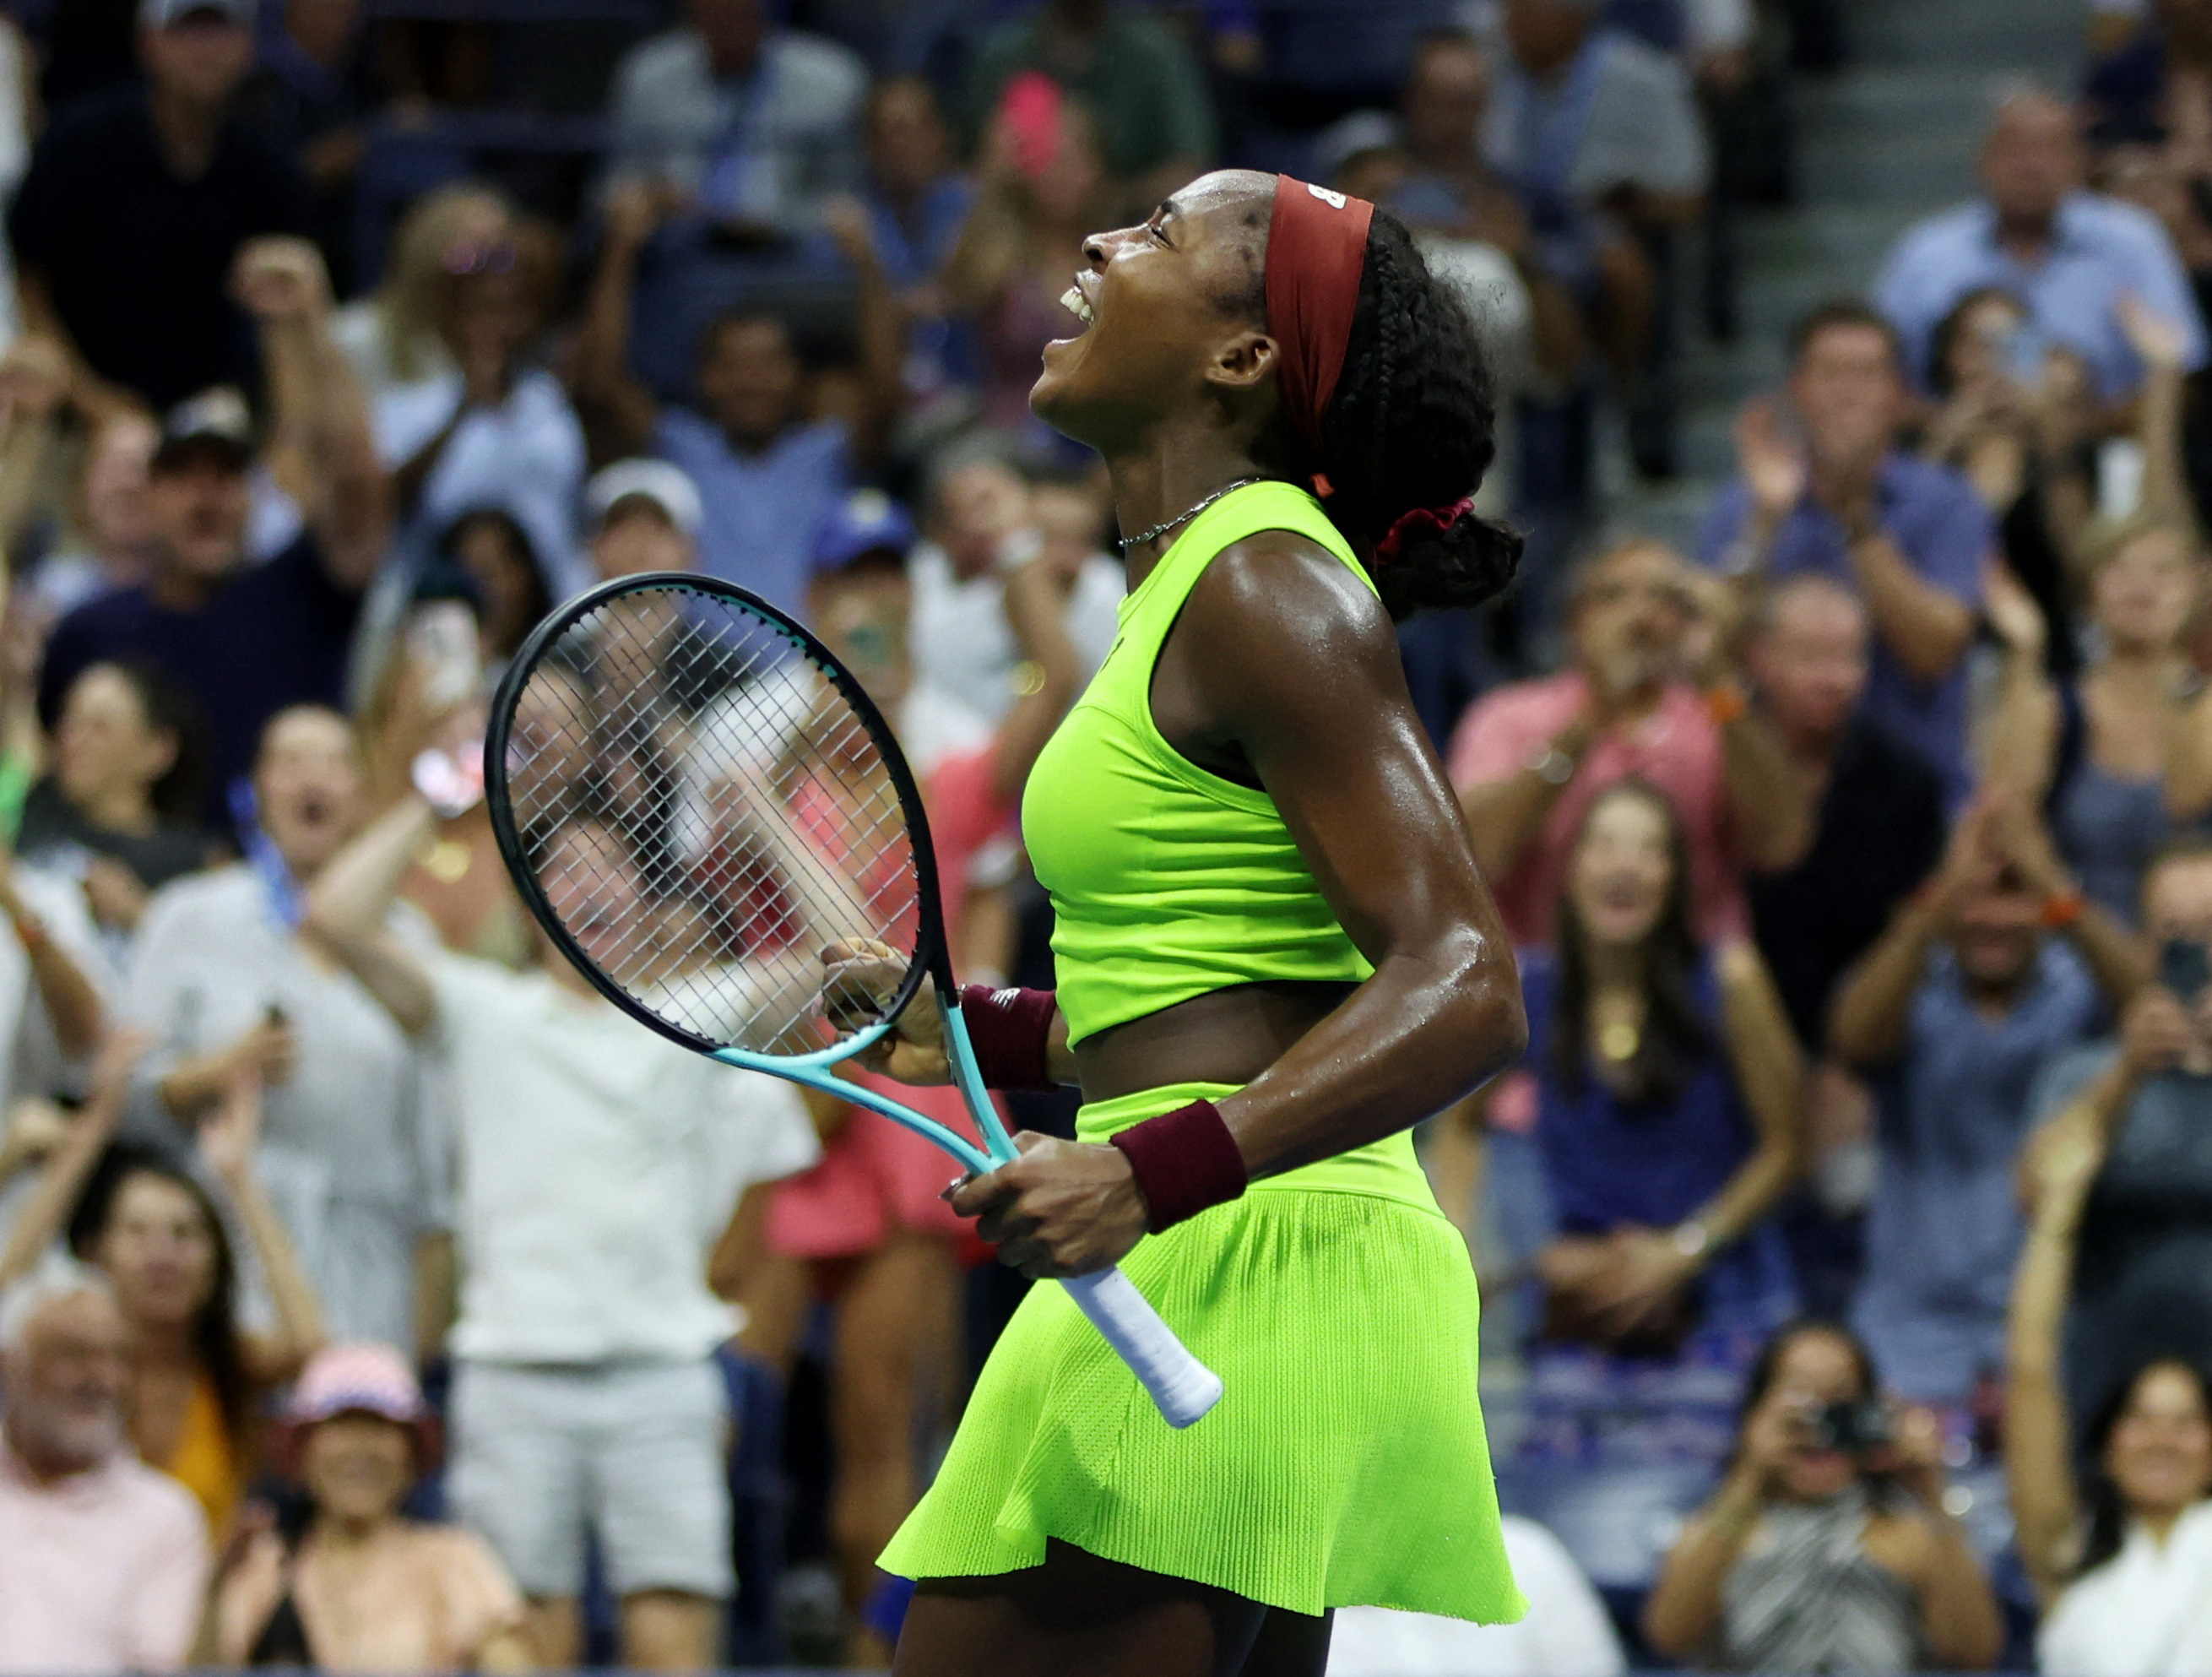 Gauff sticks up for activists after US Open protest Reuters